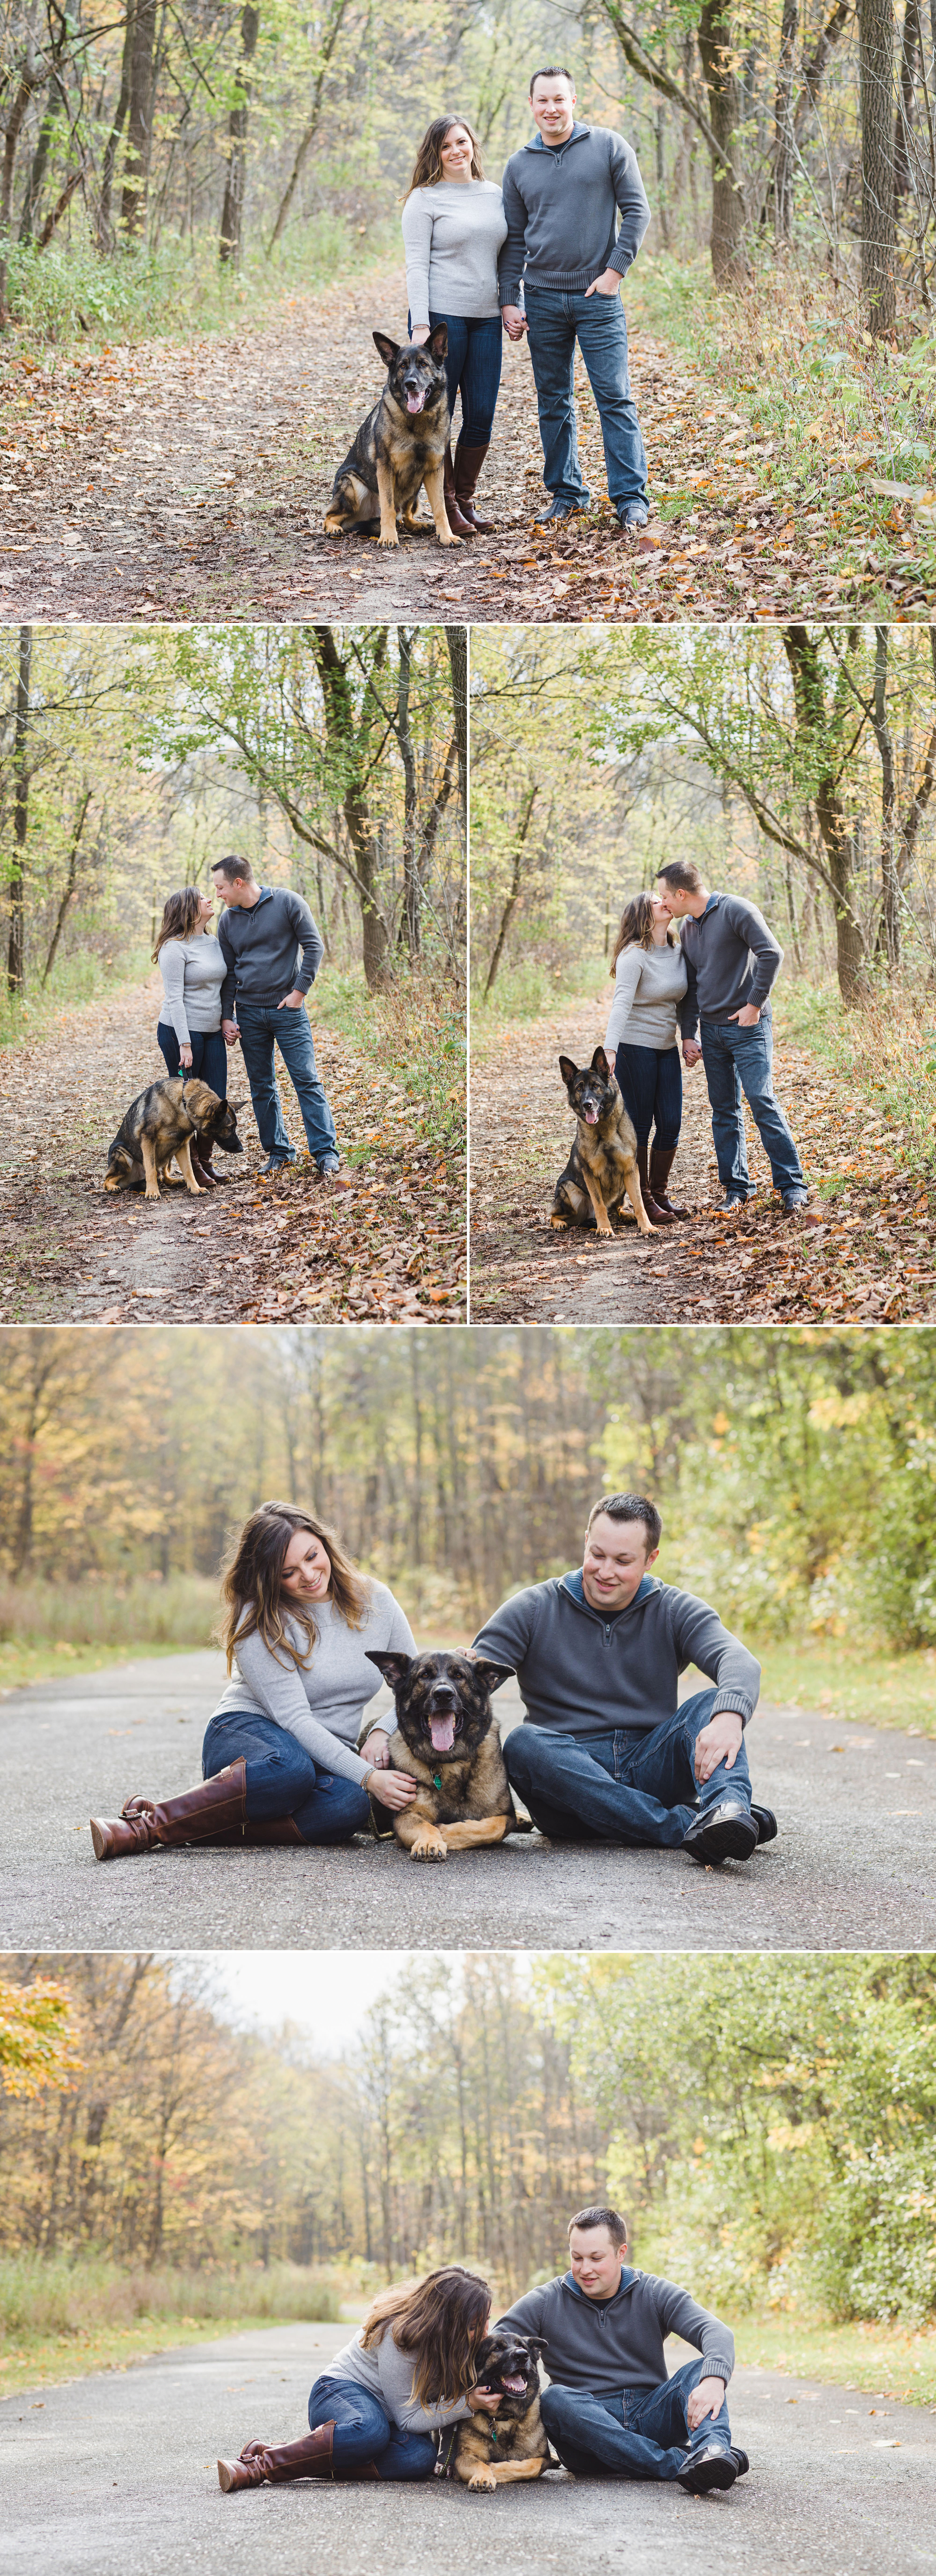 Engagement Photographs of a guy and girl with their dog